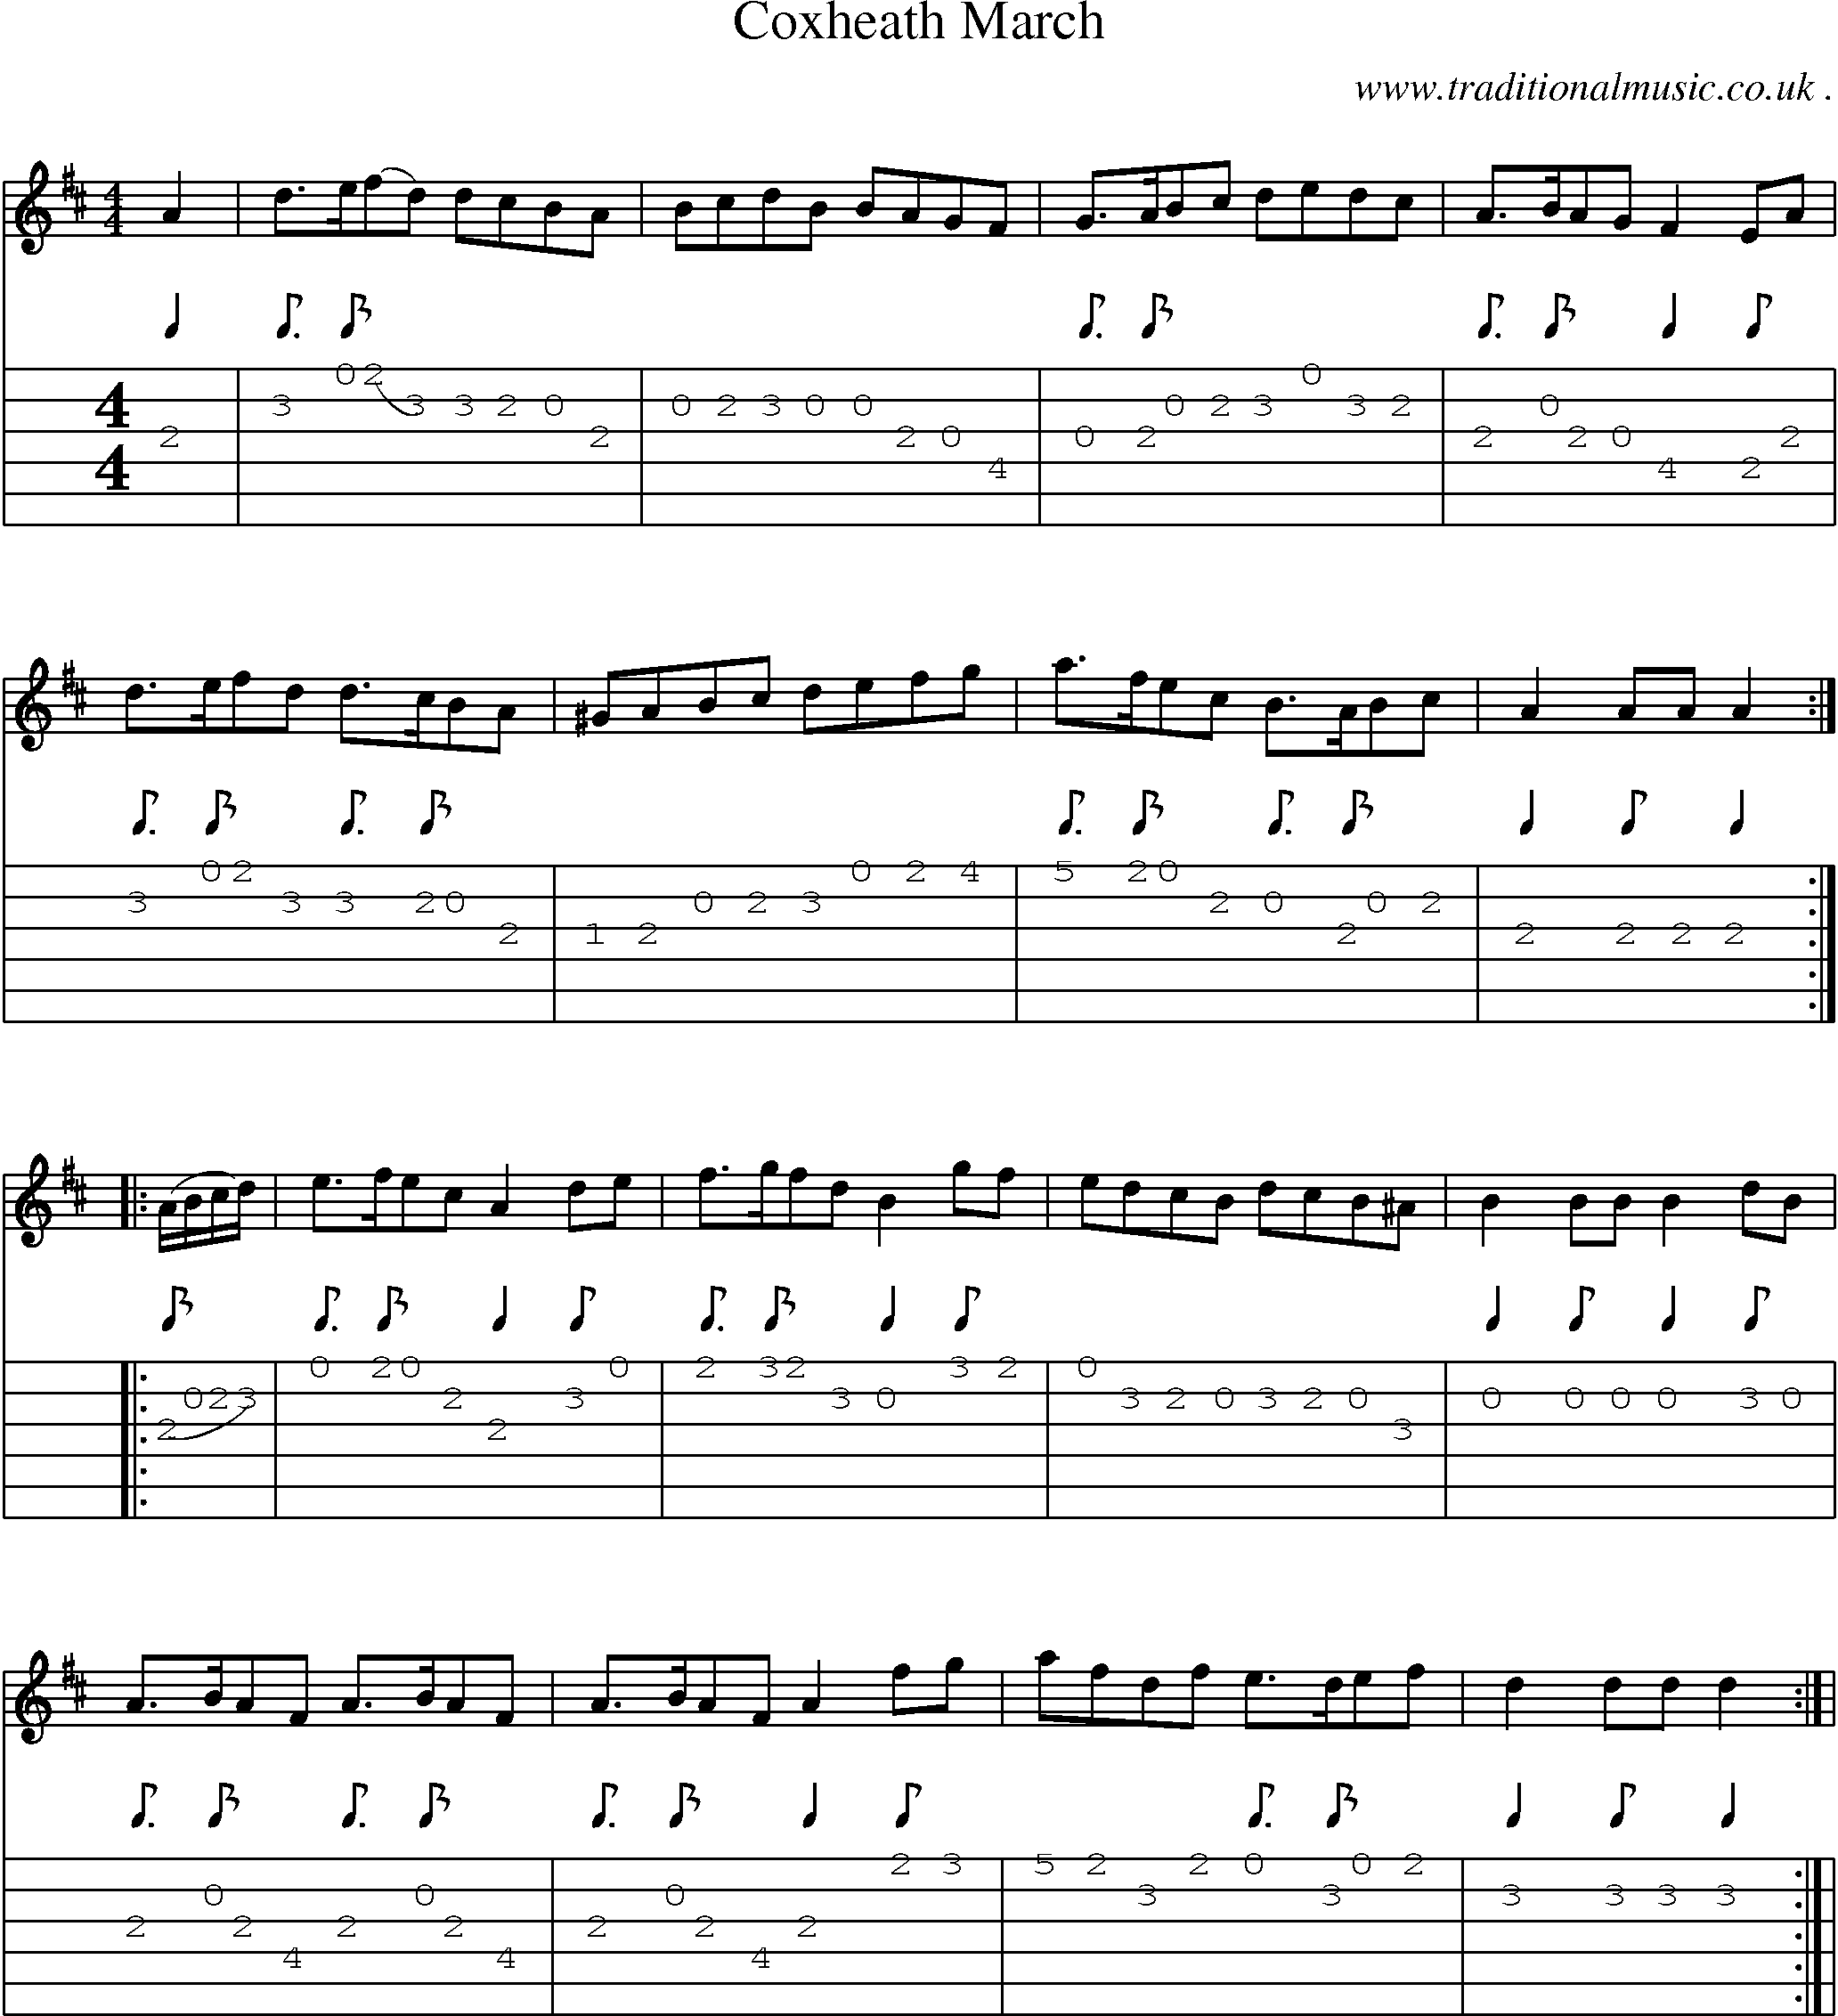 Sheet-Music and Guitar Tabs for Coxheath March